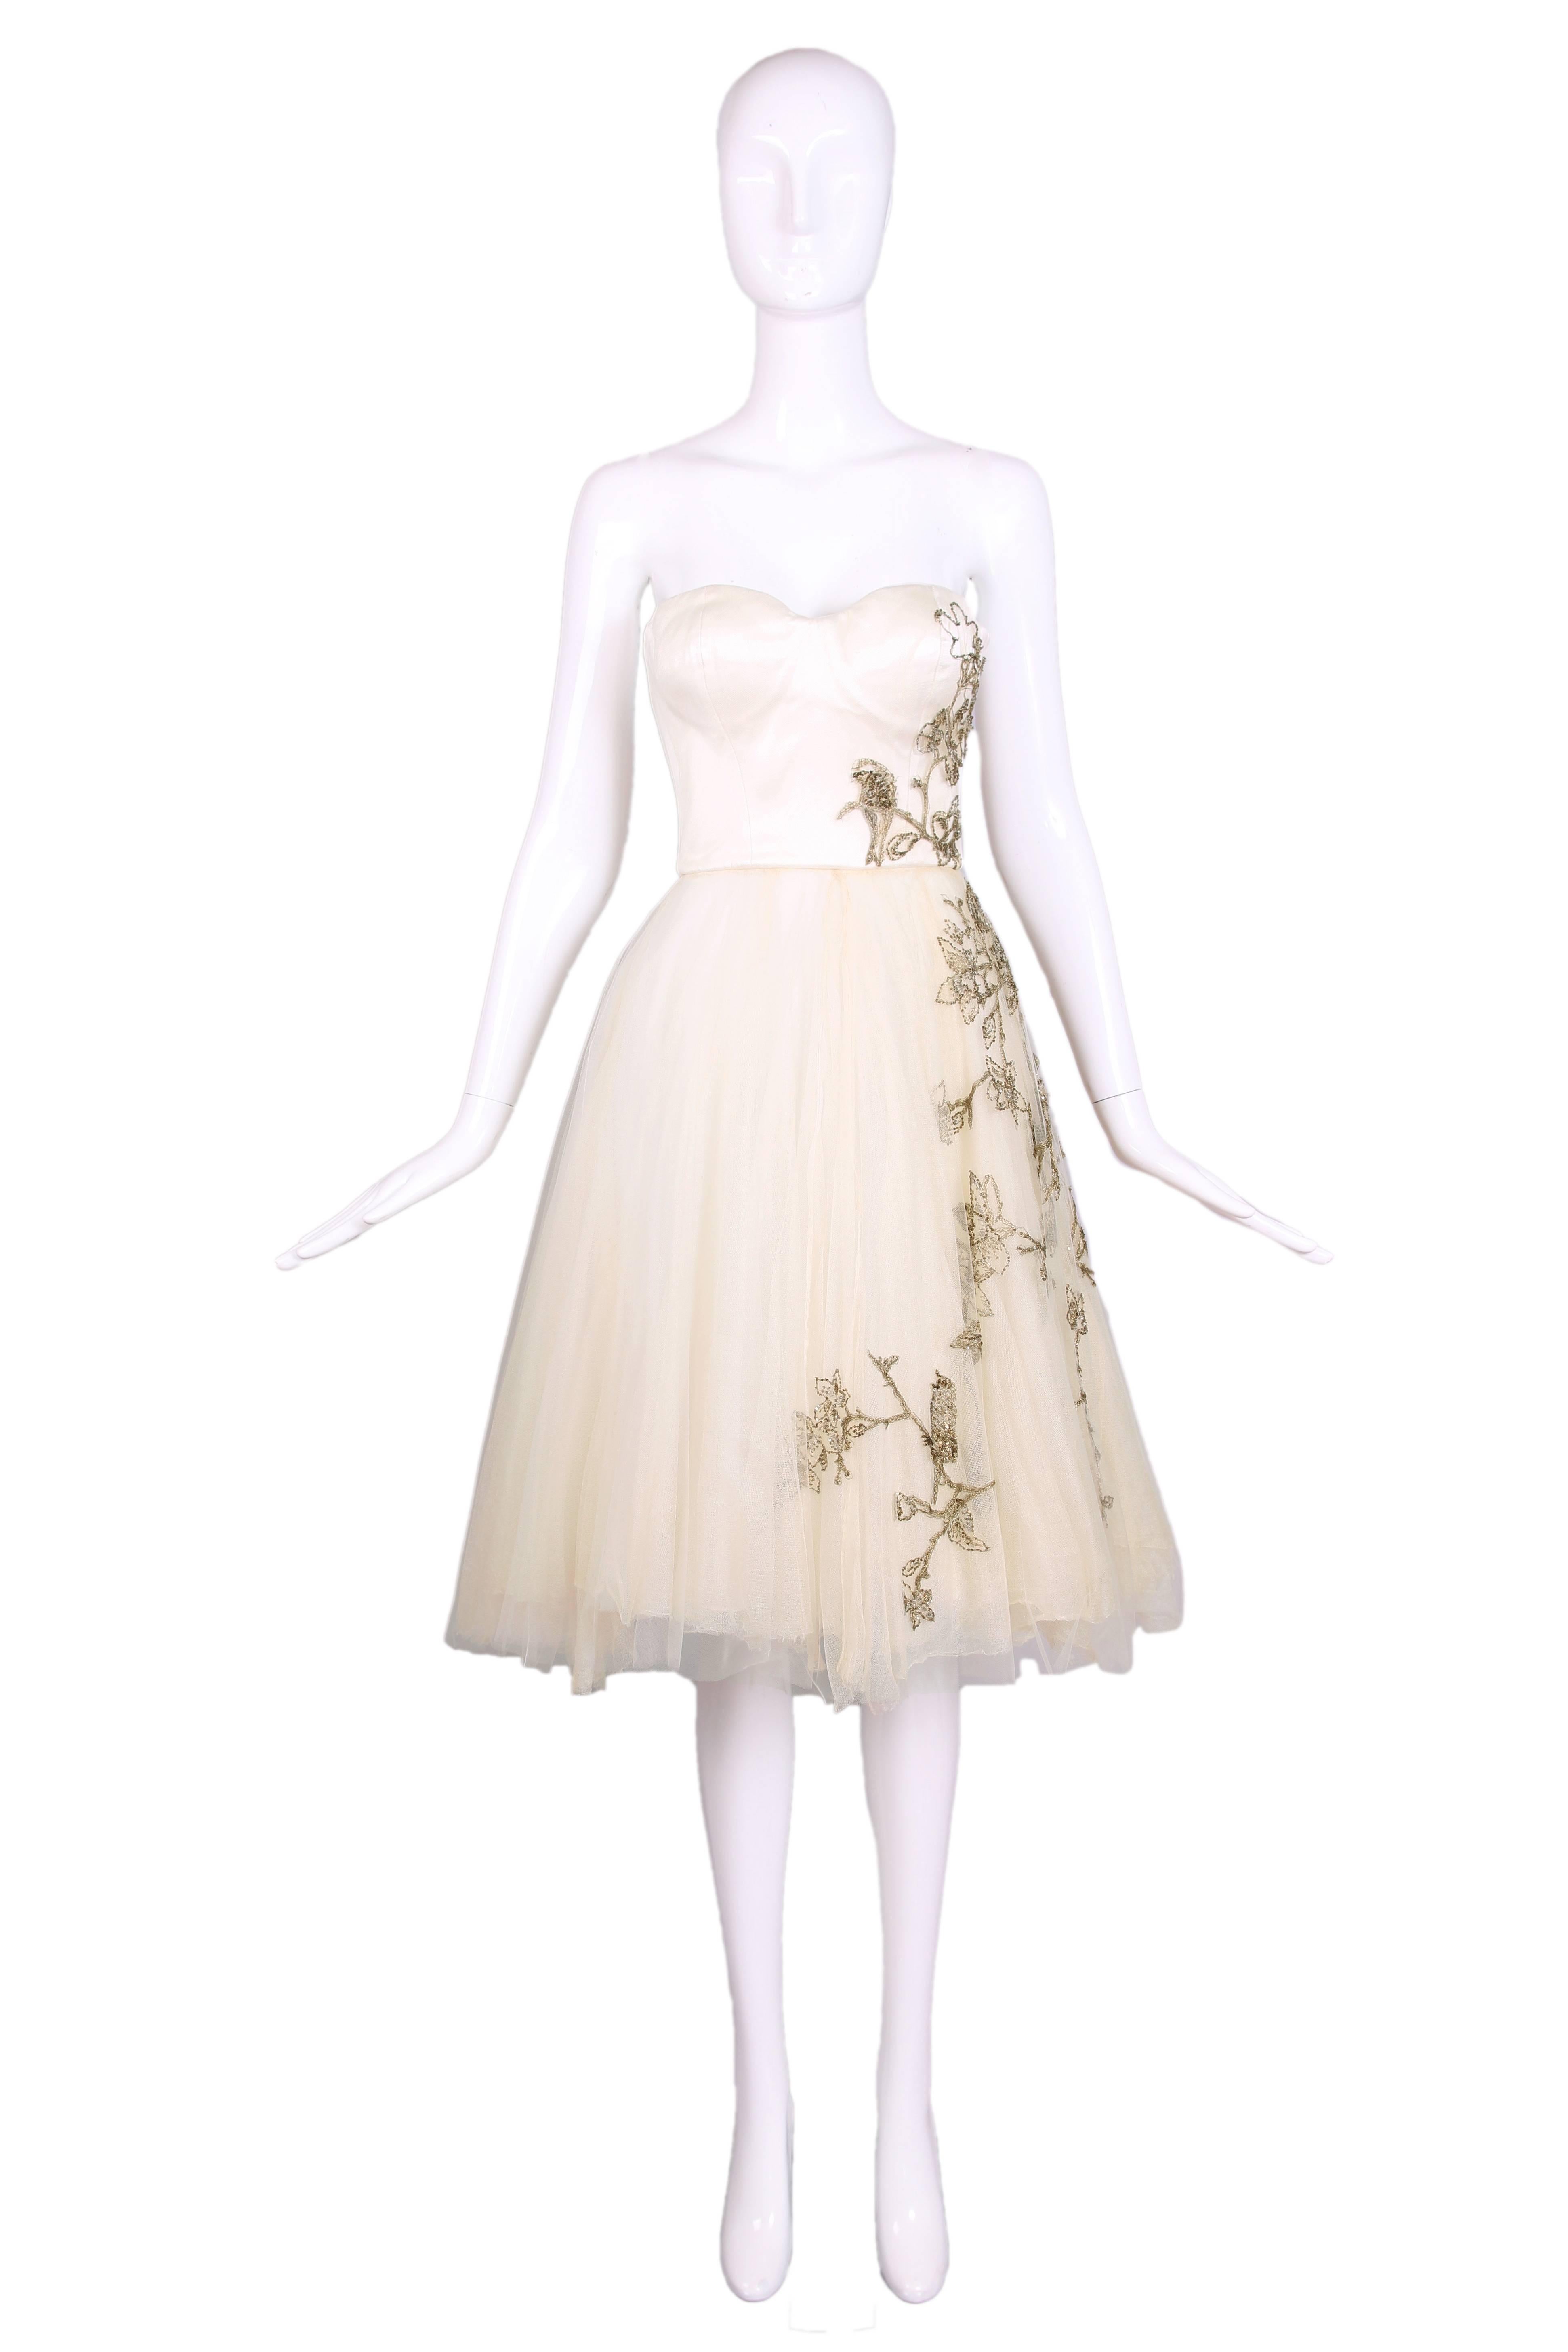 2008 F/W Alexander McQueen creme-colored strapless cocktail dress with an embroidered bird, branches and flower motif sewn out of gold and copper metallic thread and tiny copper sequins. The bodice is made of a silk satin with a single over layer of